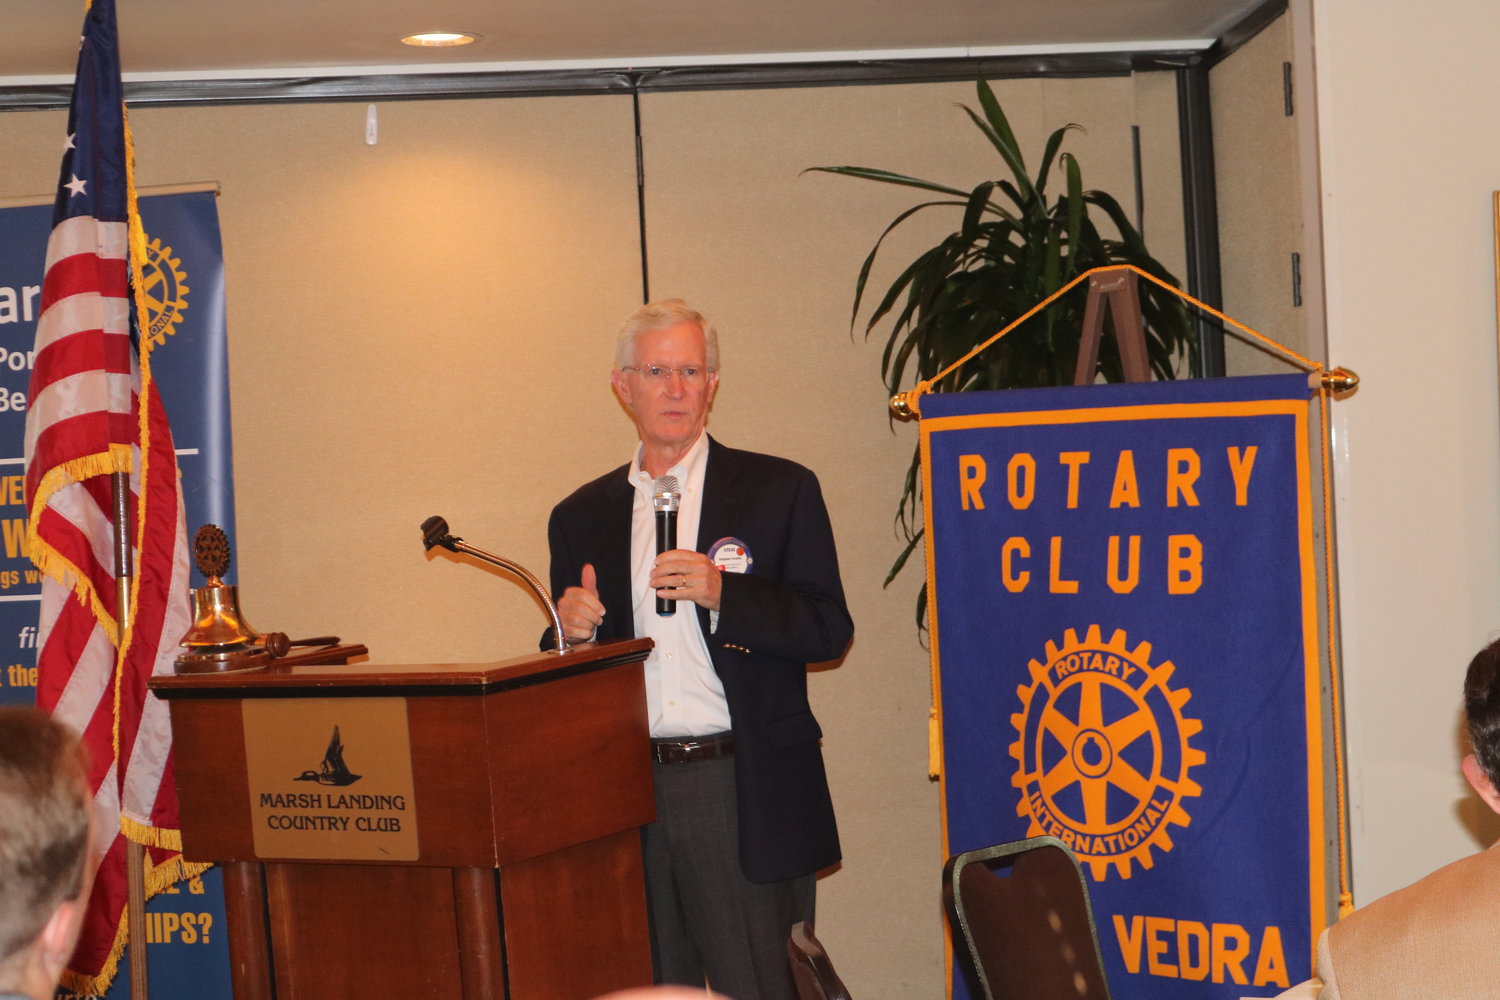 Rotarian Steve Crosby kicks off the Rotary Club of Ponte Vedra Beach/Ponte Vedra Recorder Local Heroes Awards ceremony on Thursday, May 27. The event recognizes individuals who give back to the community and reflect the spirit of the Rotary Club’s motto, “Service Above Self.”